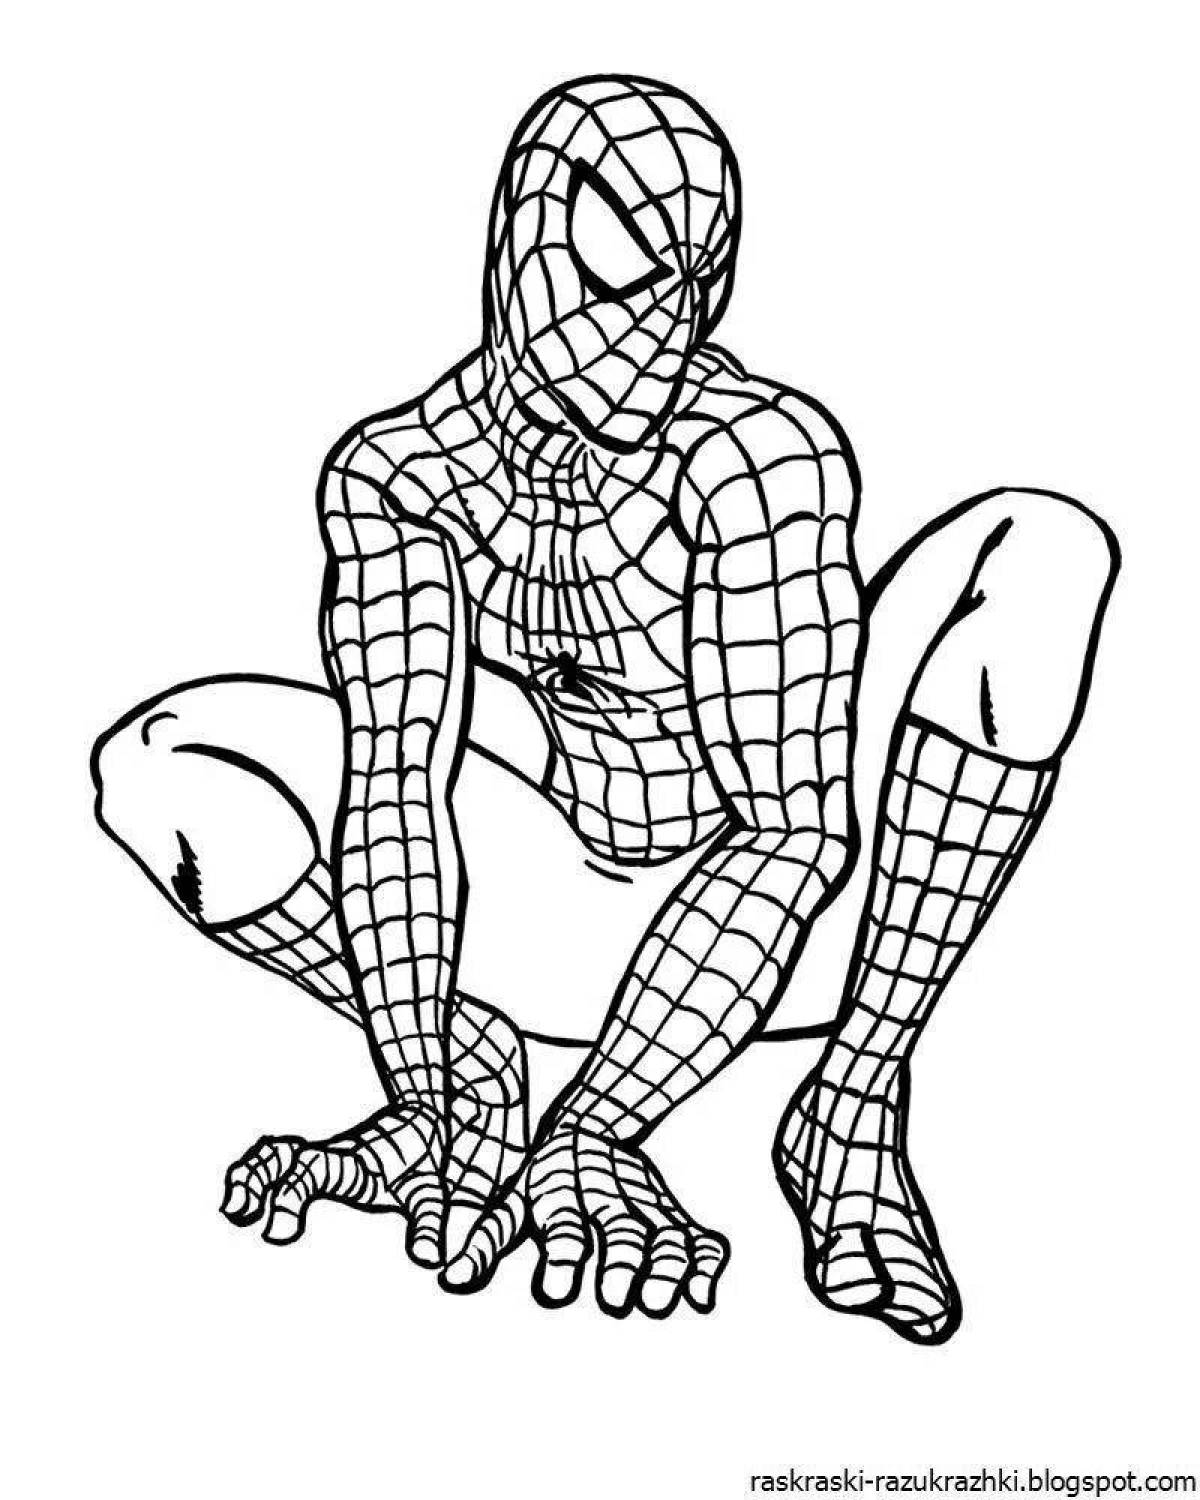 Colorful coloring pages of superheroes for children 6-7 years old